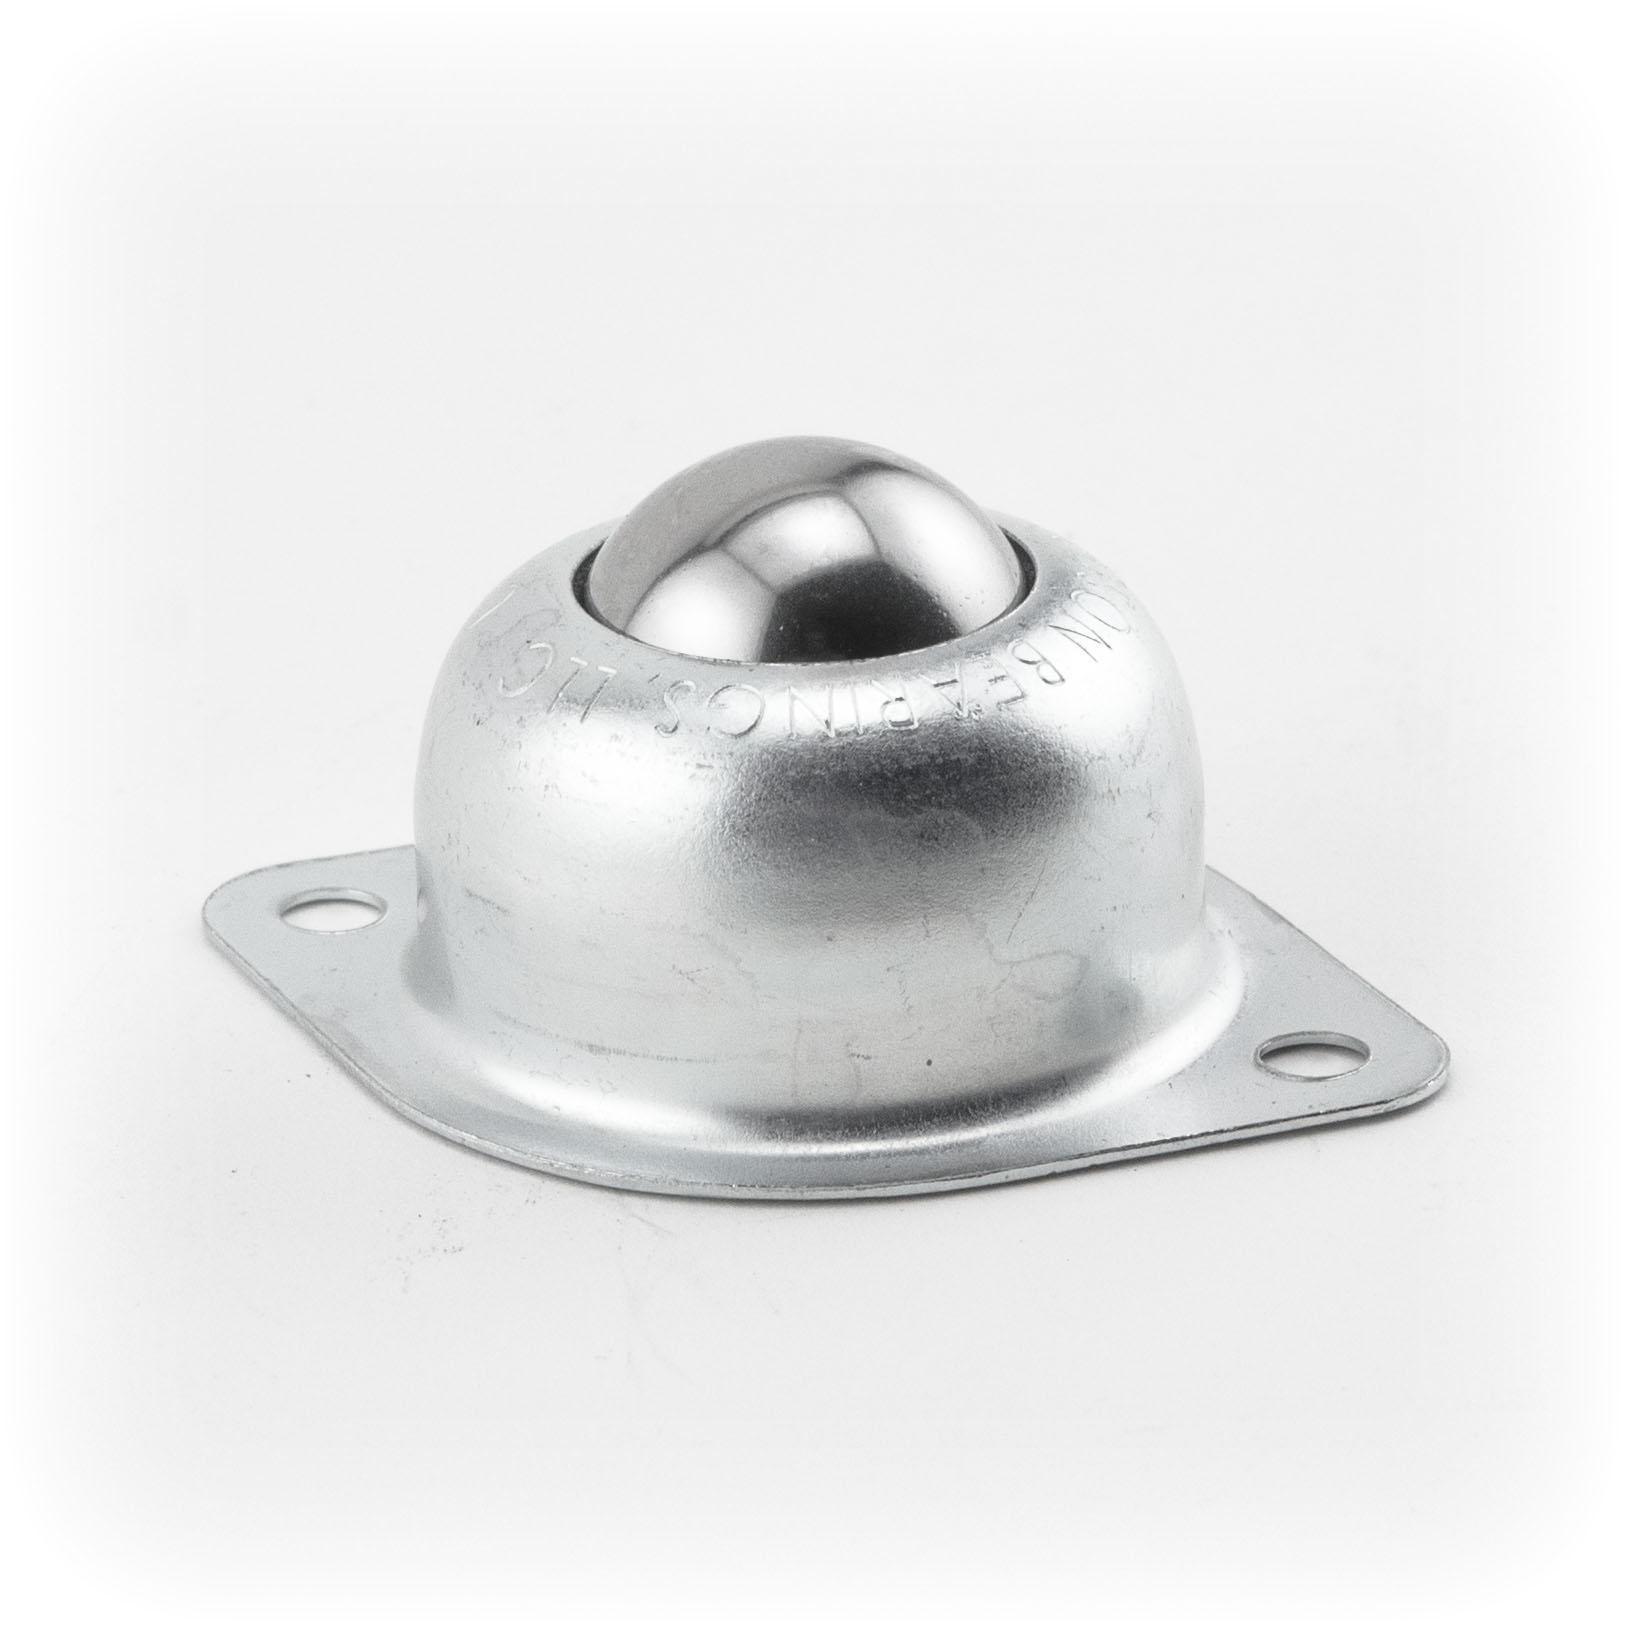 Ball Transfer; 1"; Stainless Steel Main Ball; Flange (2"x2-3/4"; 2-hole spacing: 2-3/16"; 3/16" bolt); Zinc Coated Housing; 75#; 1-3/16" load height (Item #89353)